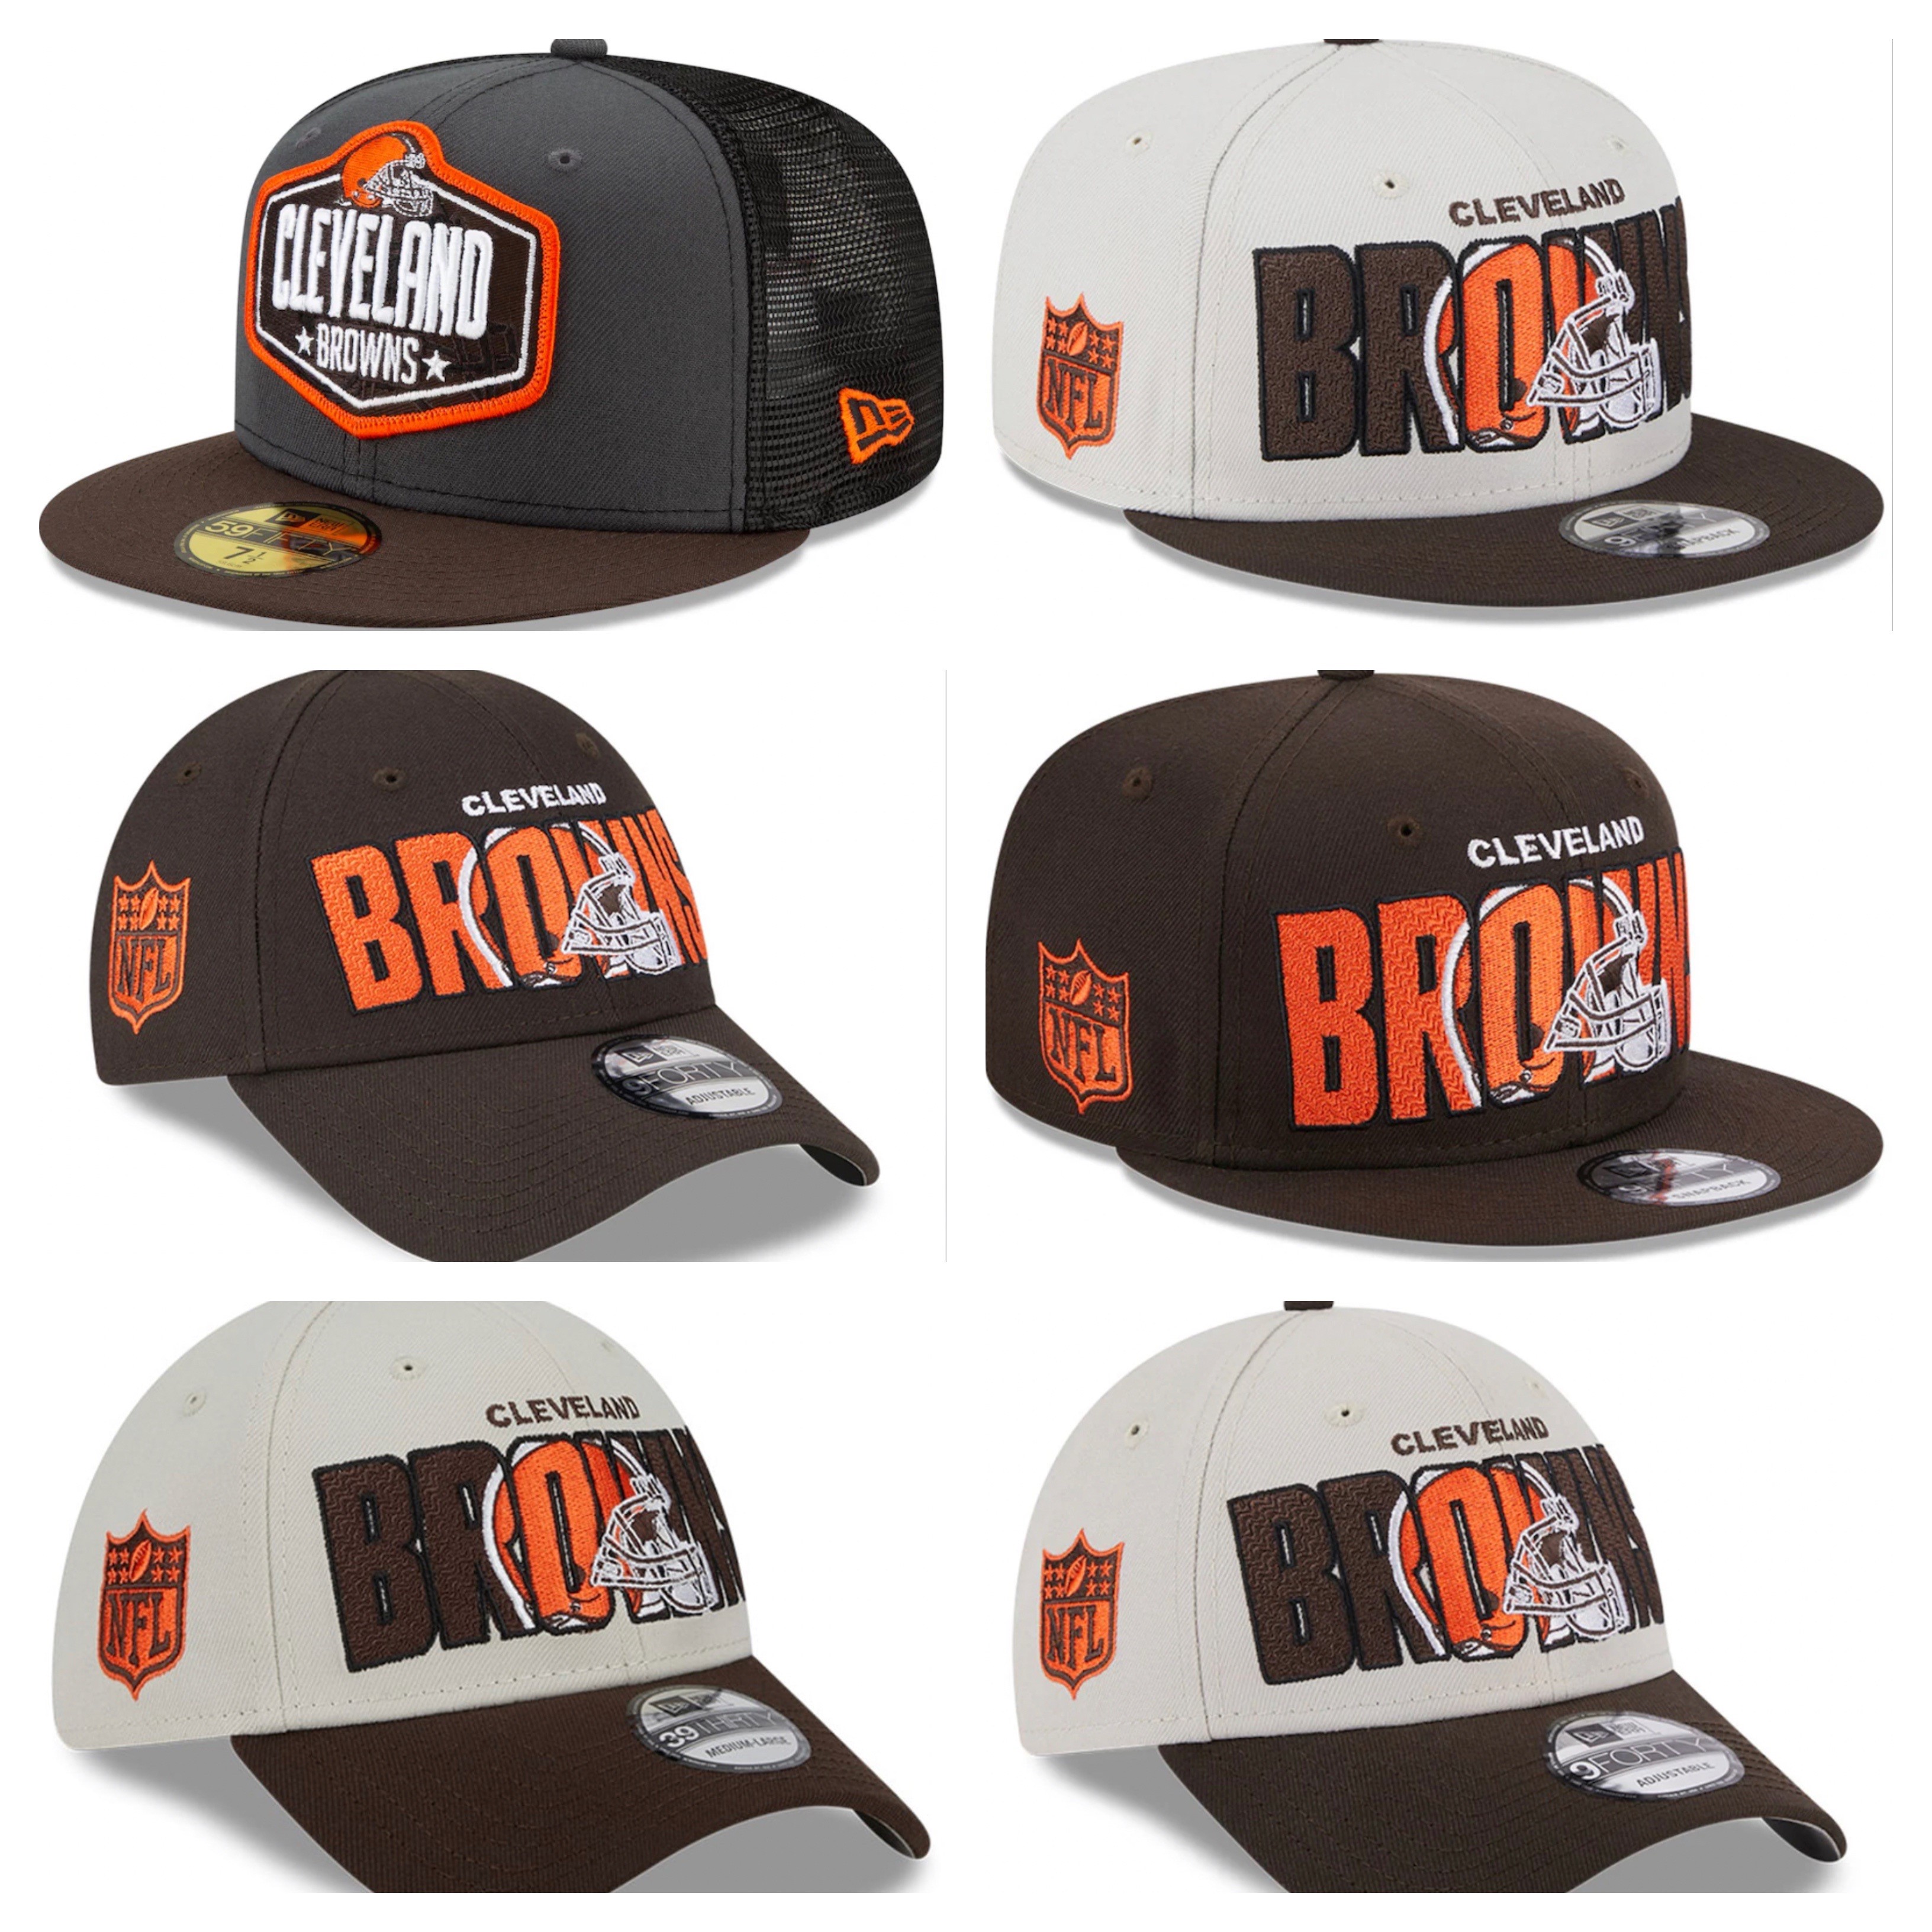 NFL Draft 2023 hats released for Cleveland Browns, all teams 